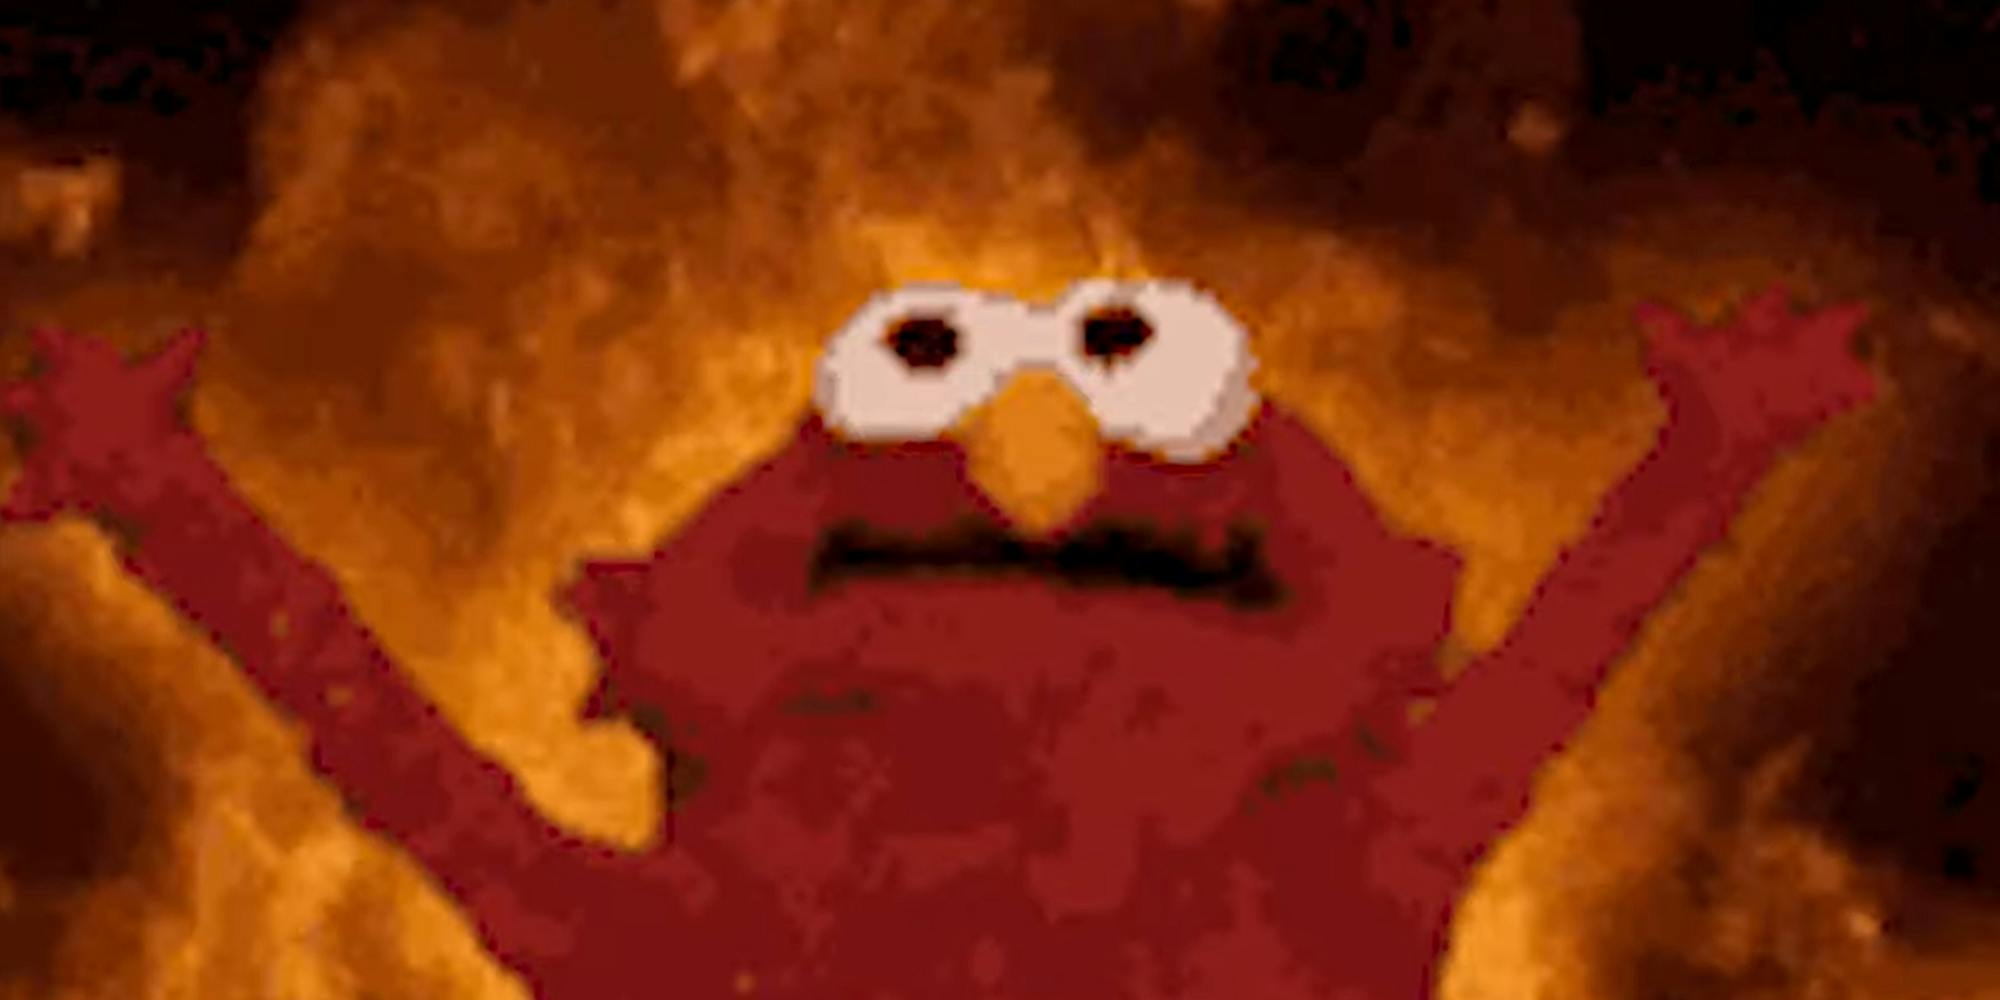 Elmo on Fire Meme: History, Popularity, and More